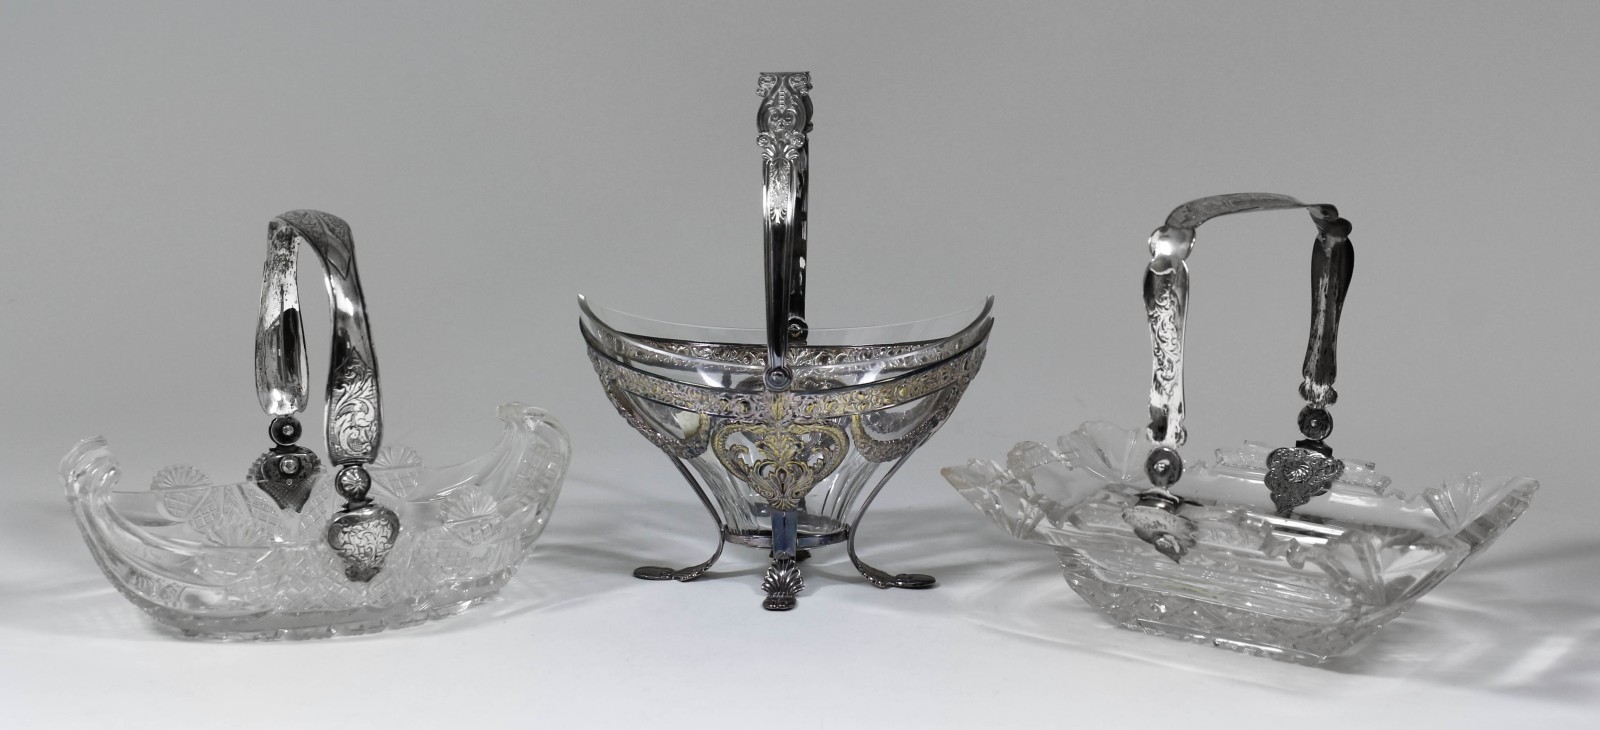 A 19th Century Dutch heavy cut-glass and silver mounted rectangular basket, with slice, diamond and